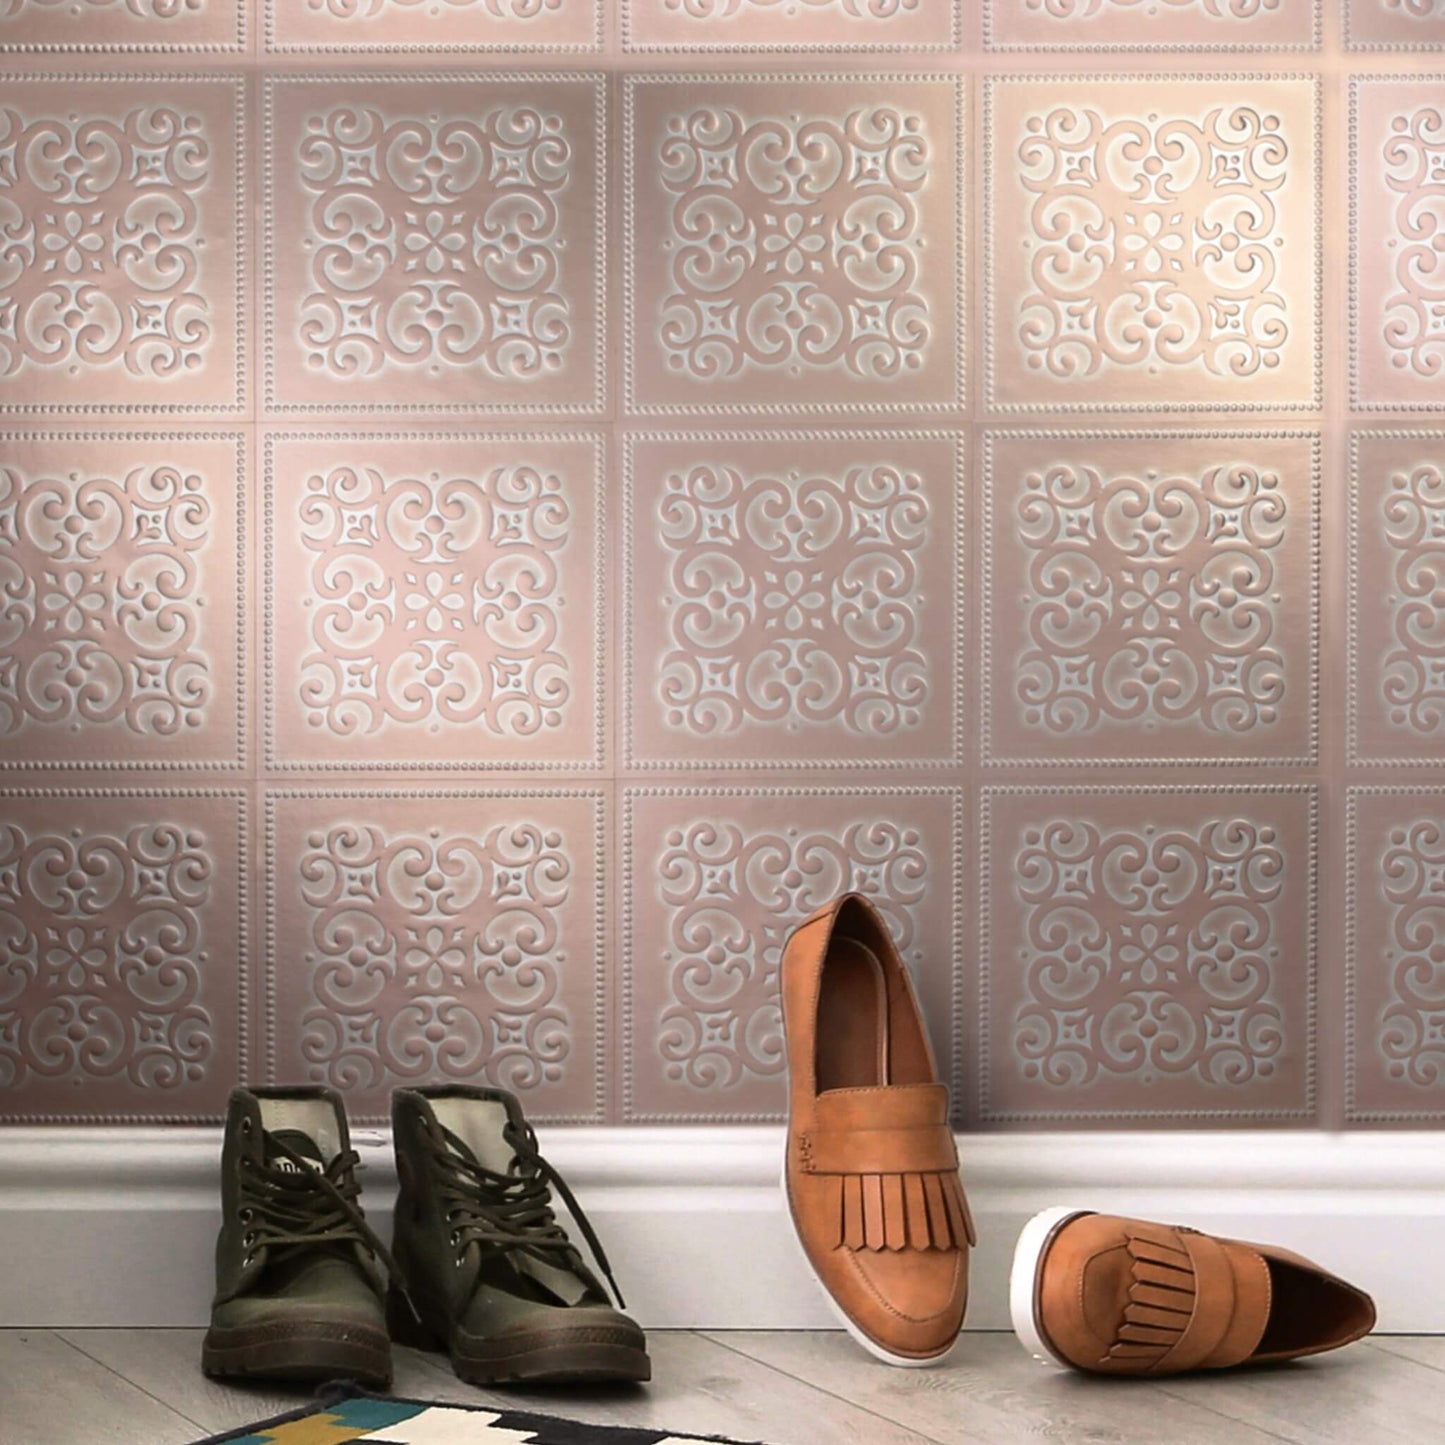 Patina Copper Wall Tile Decal